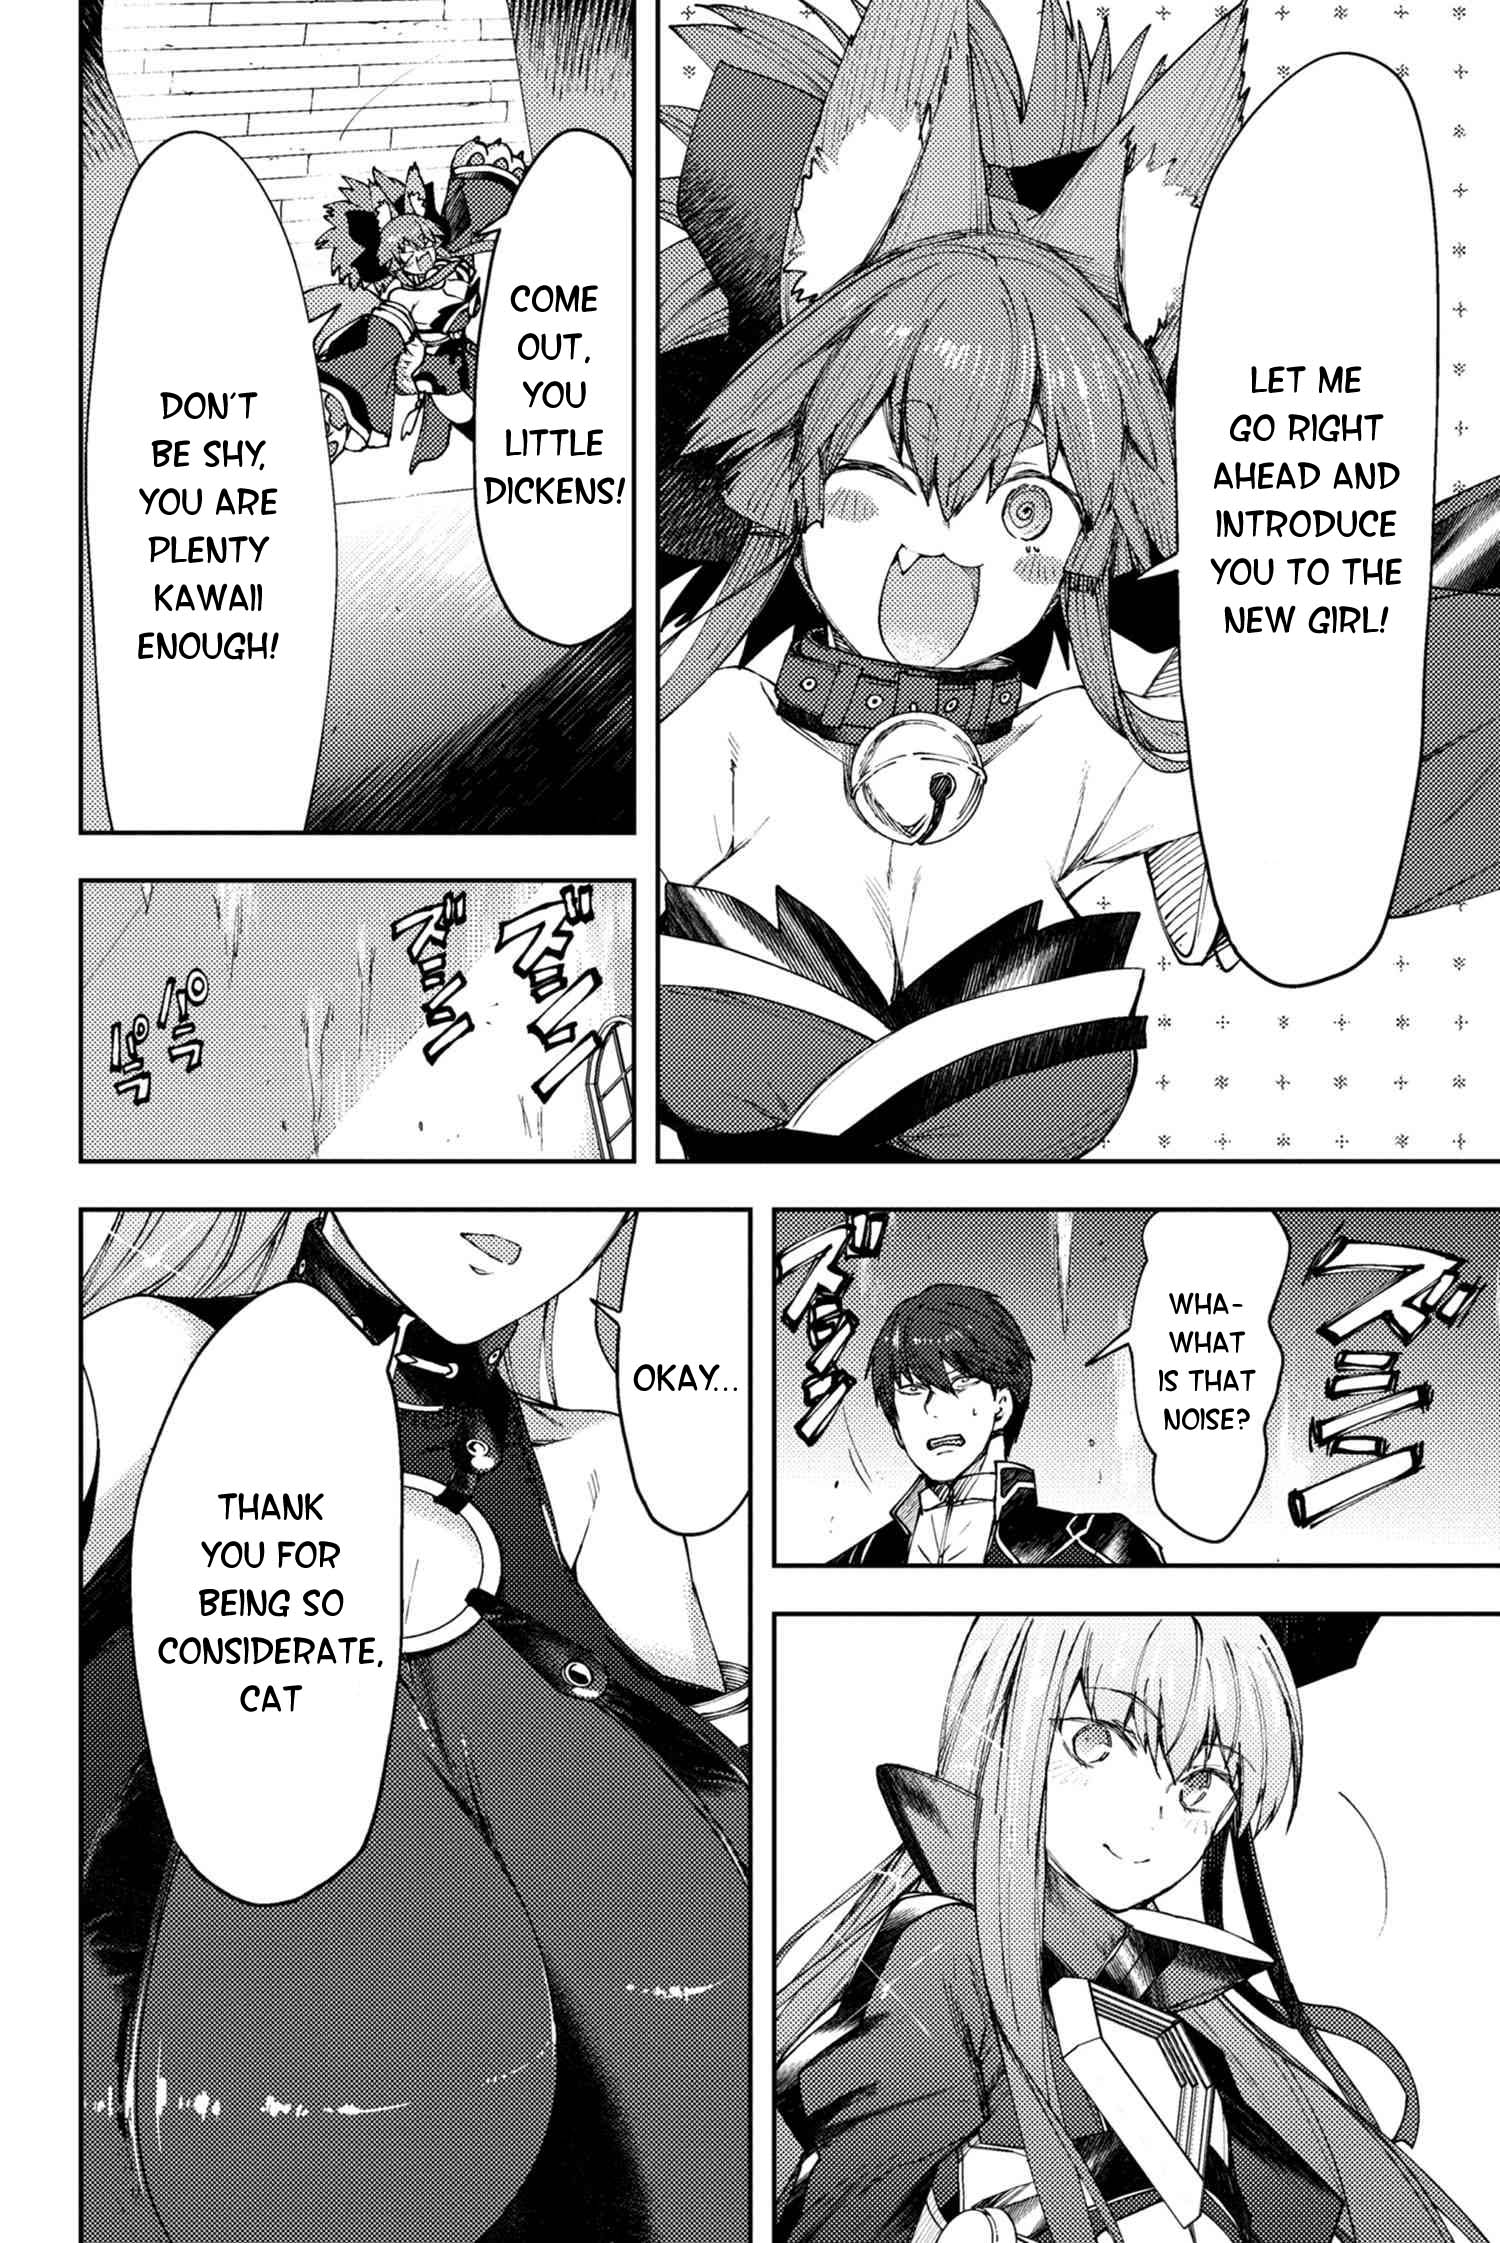 Fate/grand Order -Epic Of Remnant- Deep Sea Cyber-Paradise Se.ra.ph - 21.1 page 4-79580f6b